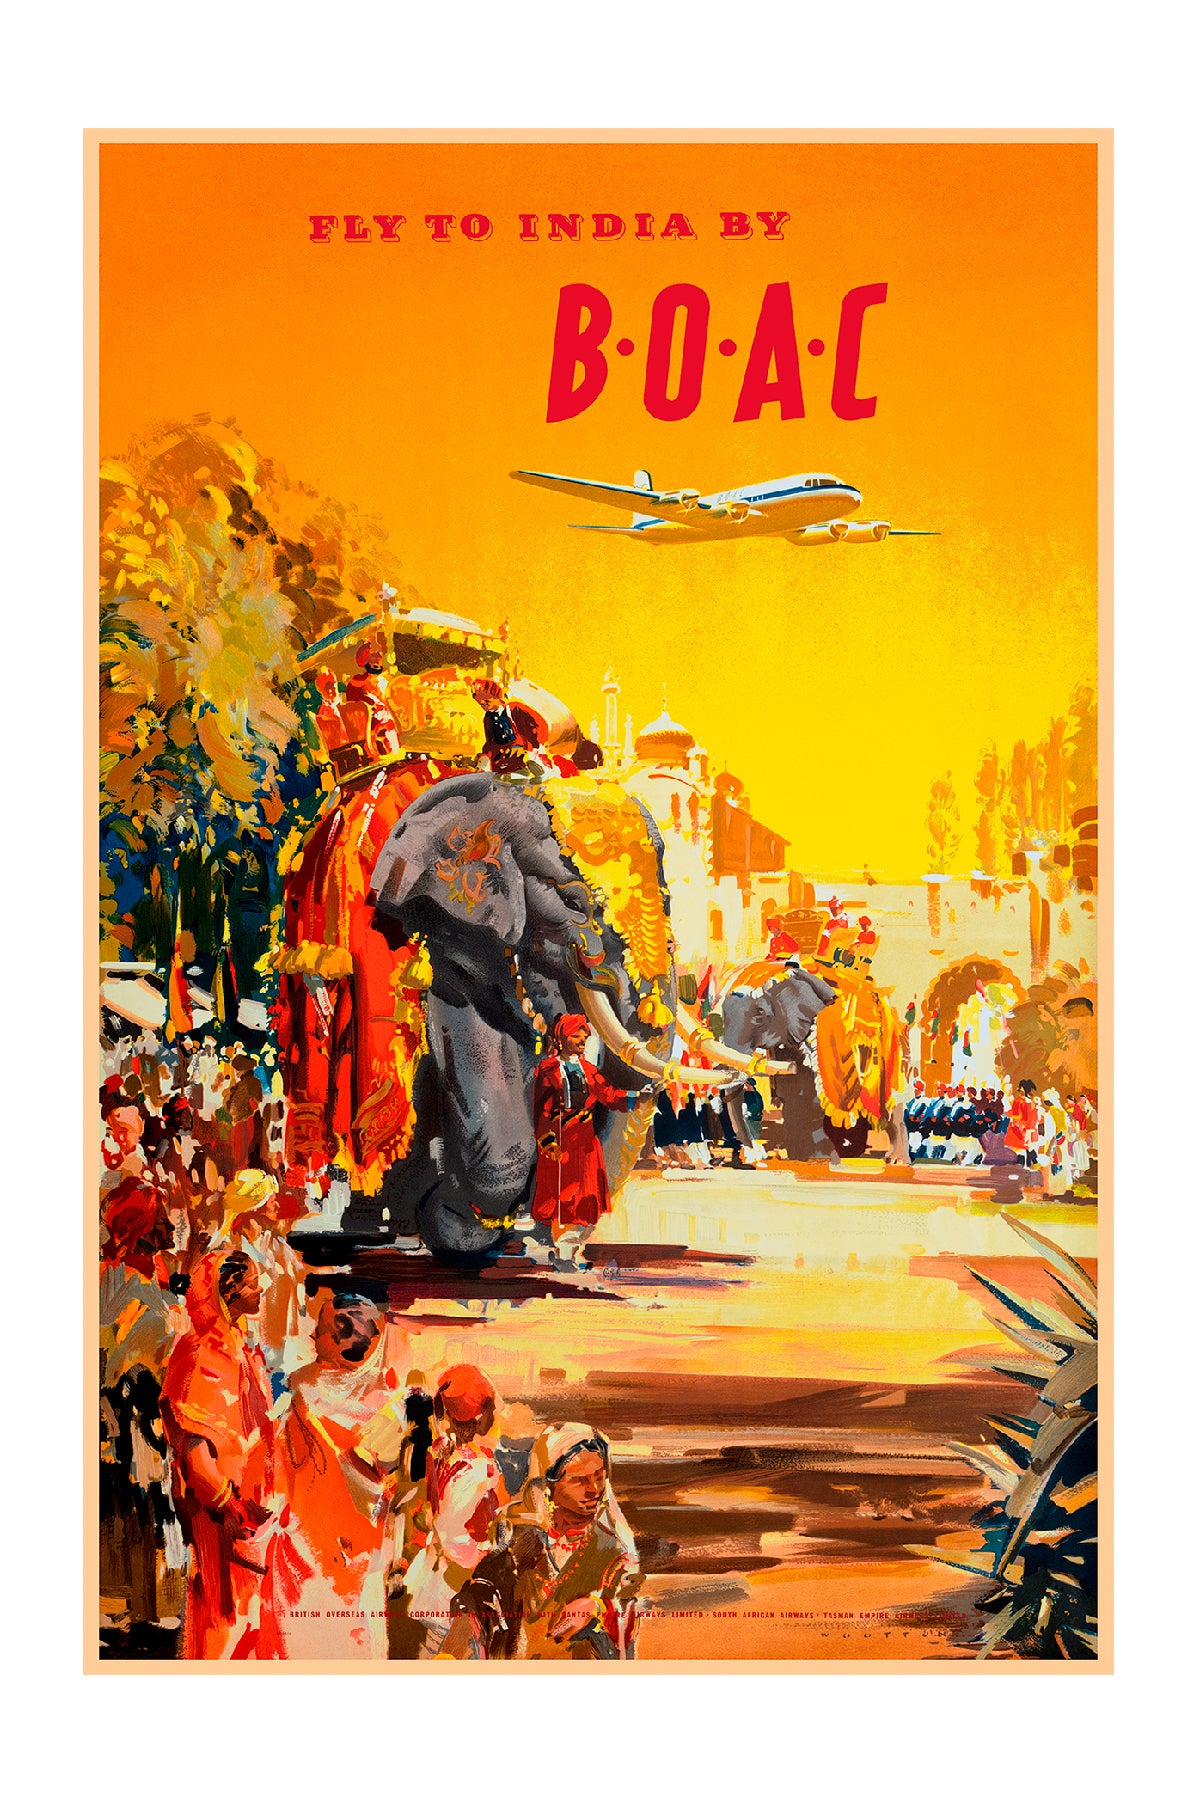 Fly to India By B.O.A.C., 1950s.